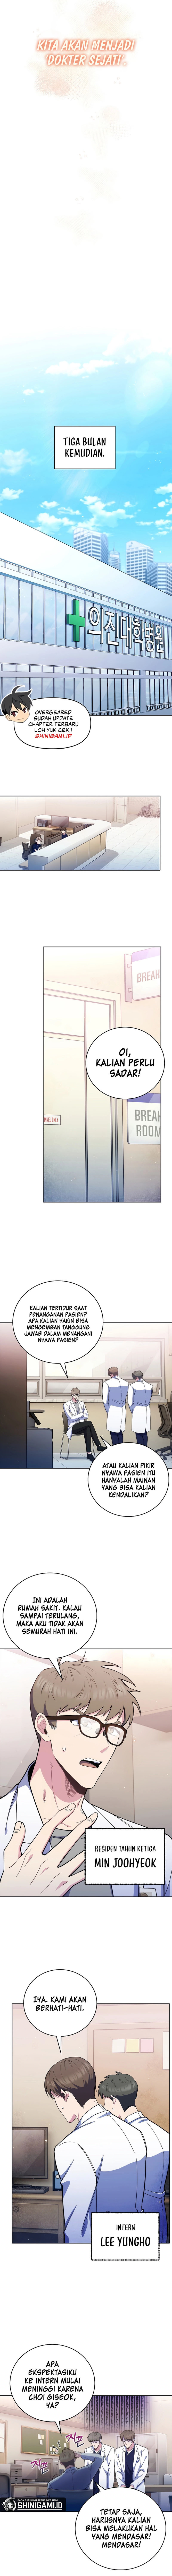 level-up-doctor Chapter 52